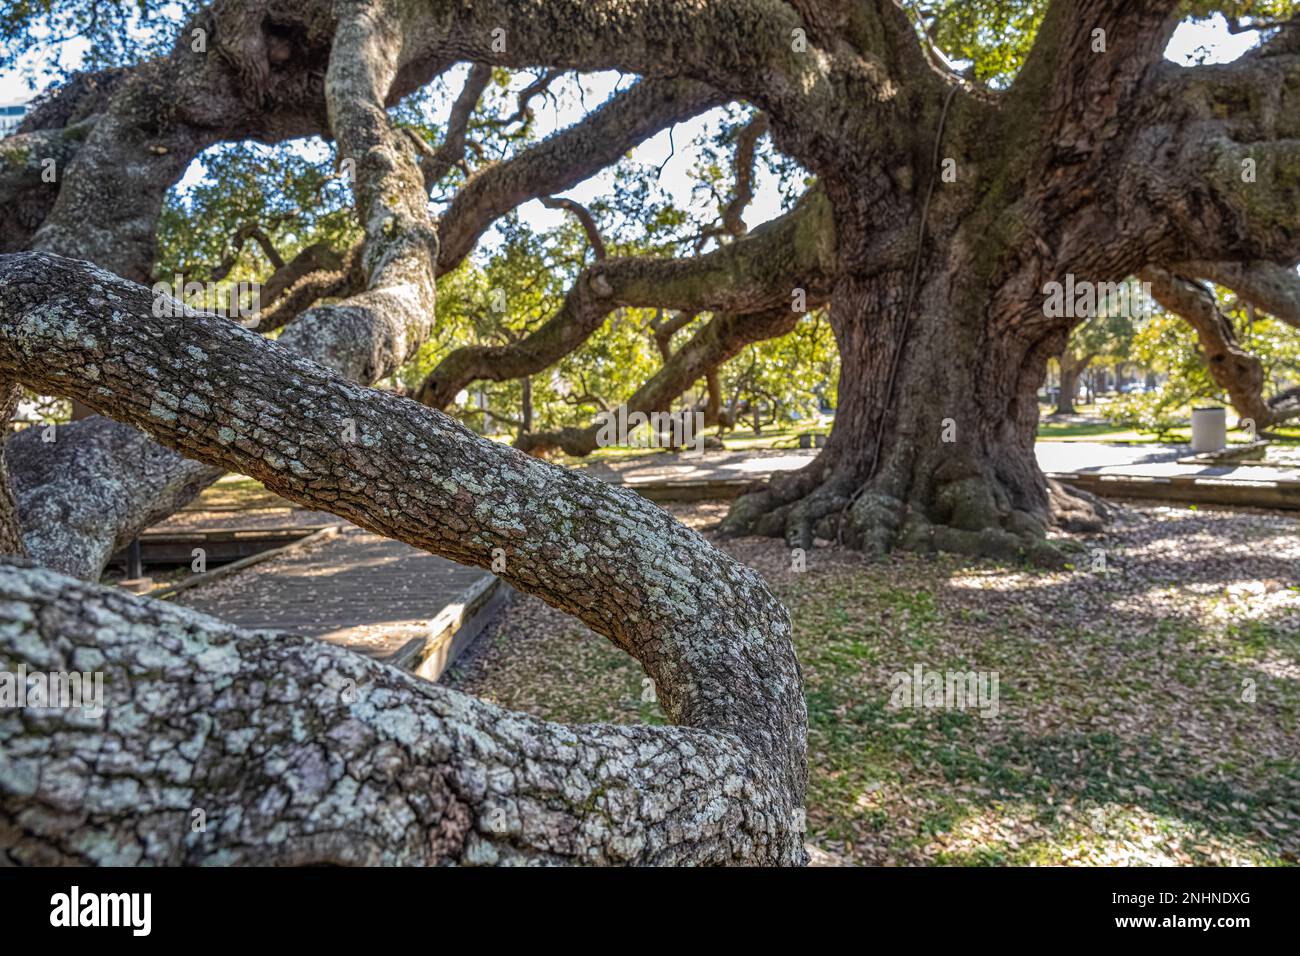 Twisting branches of Treaty Oak, an ancient Florida live oak tree at Jessie Ball duPont Park in downtown Jacksonville, Florida. (USA) Stock Photo